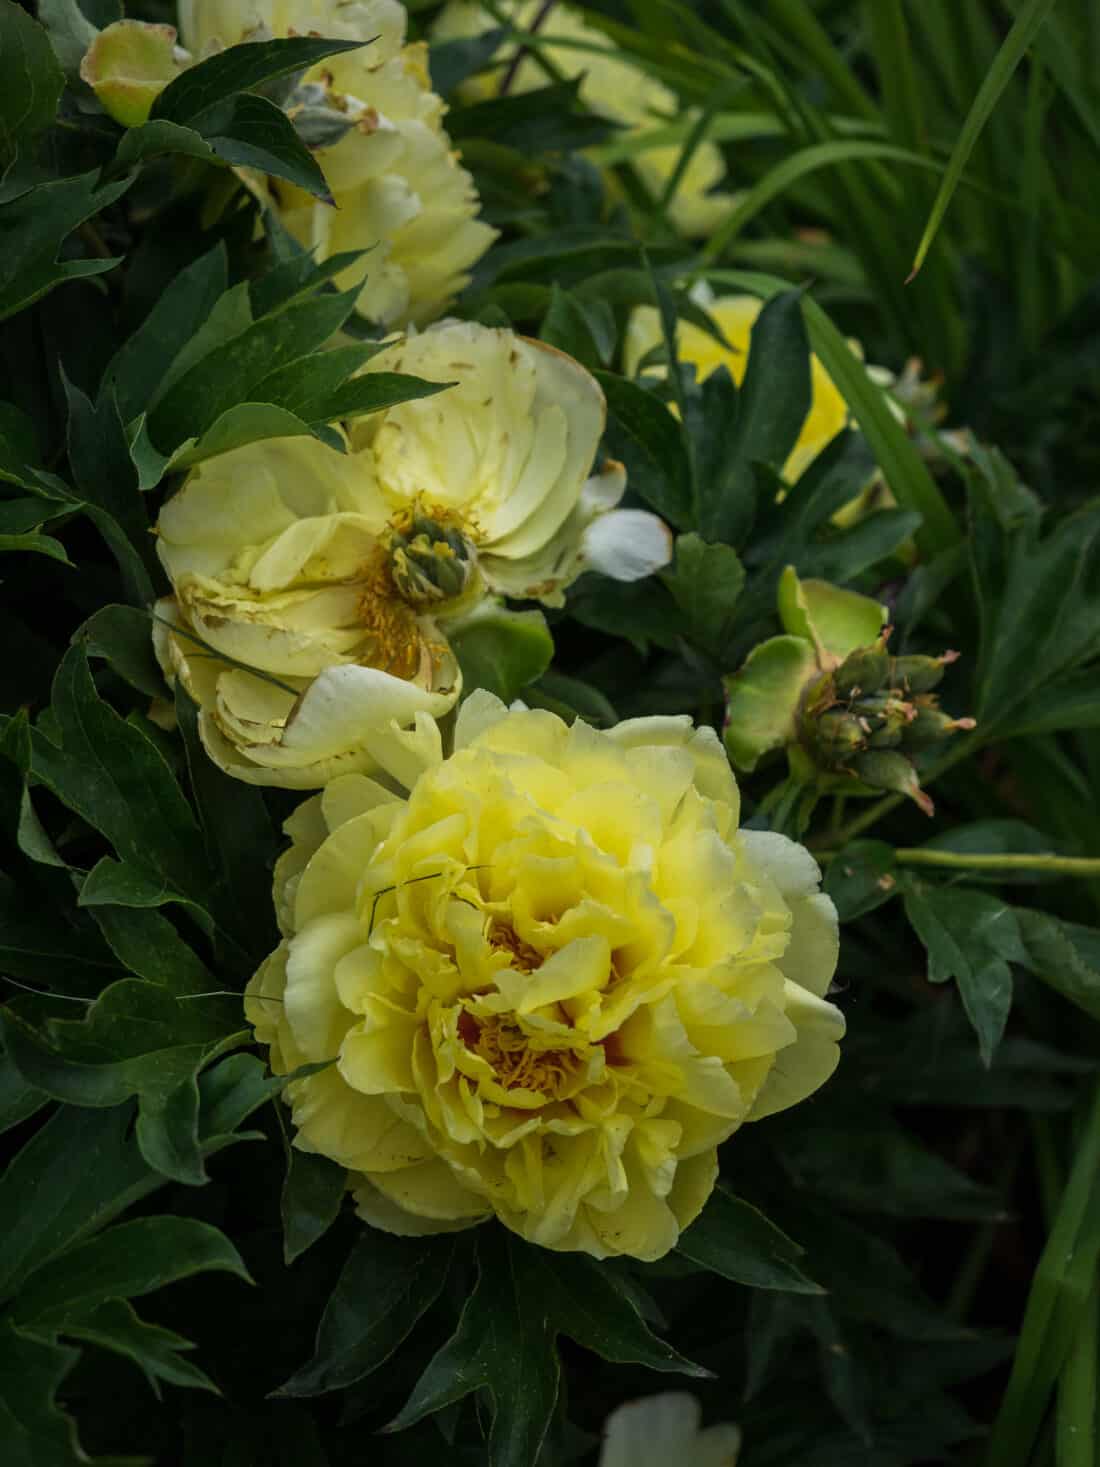 Bartzella Itoh Hybrid. Yellow, semi-double to double, fragrant, early midseason, 30" tall, intersectional. Lemon-yellow flowers centered with a soft touch of red with white-tipped carpels. Dark green, large, deeply cut leaves. APS Gold Metal 2006. Image by   F. D. Richards